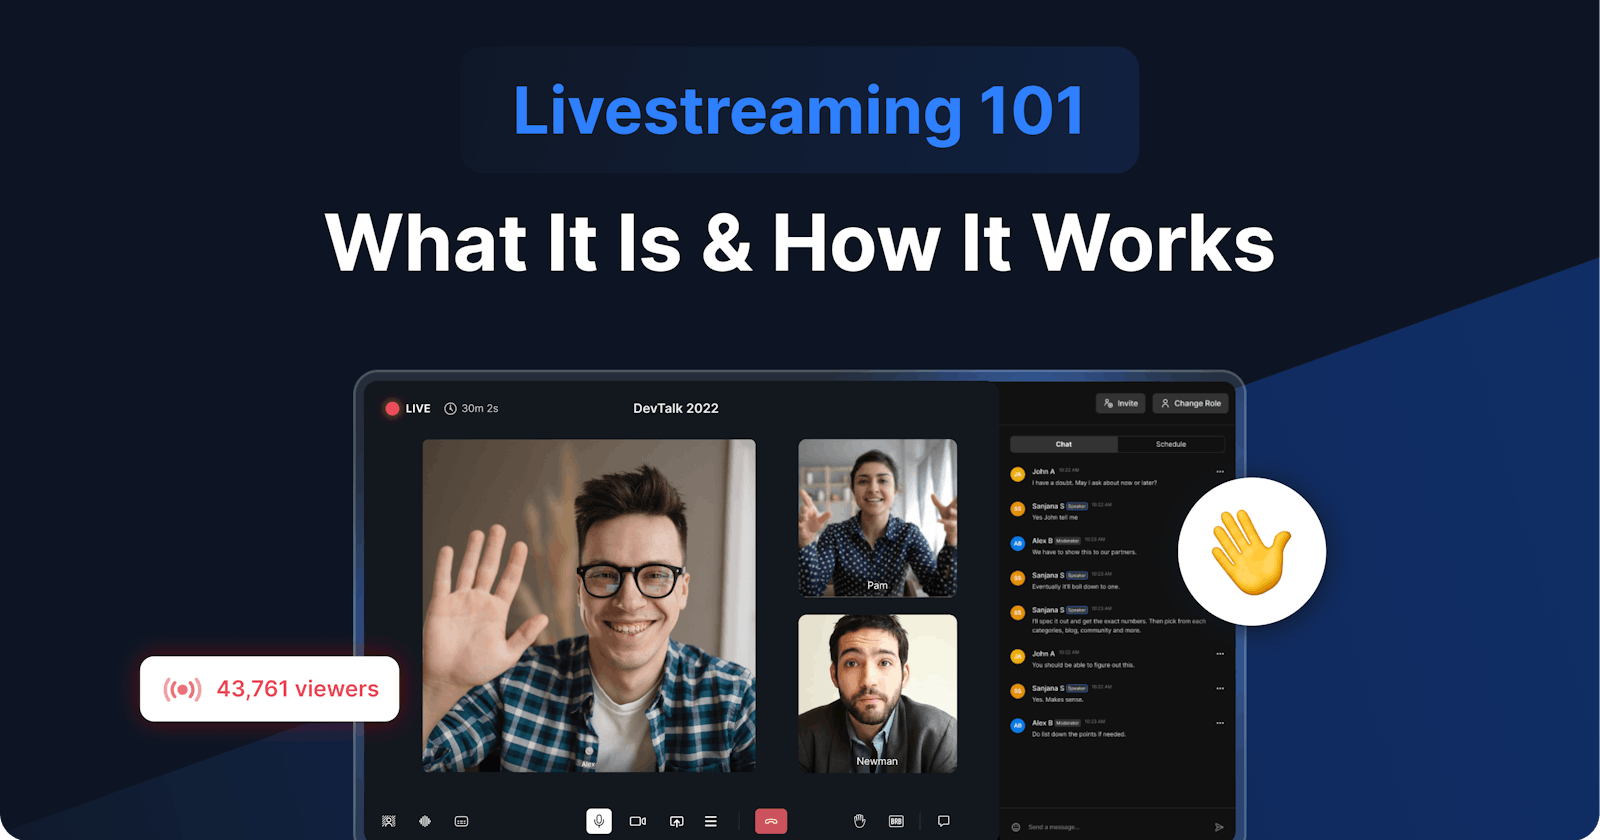 Livestreaming 101: What It Is & How It Works